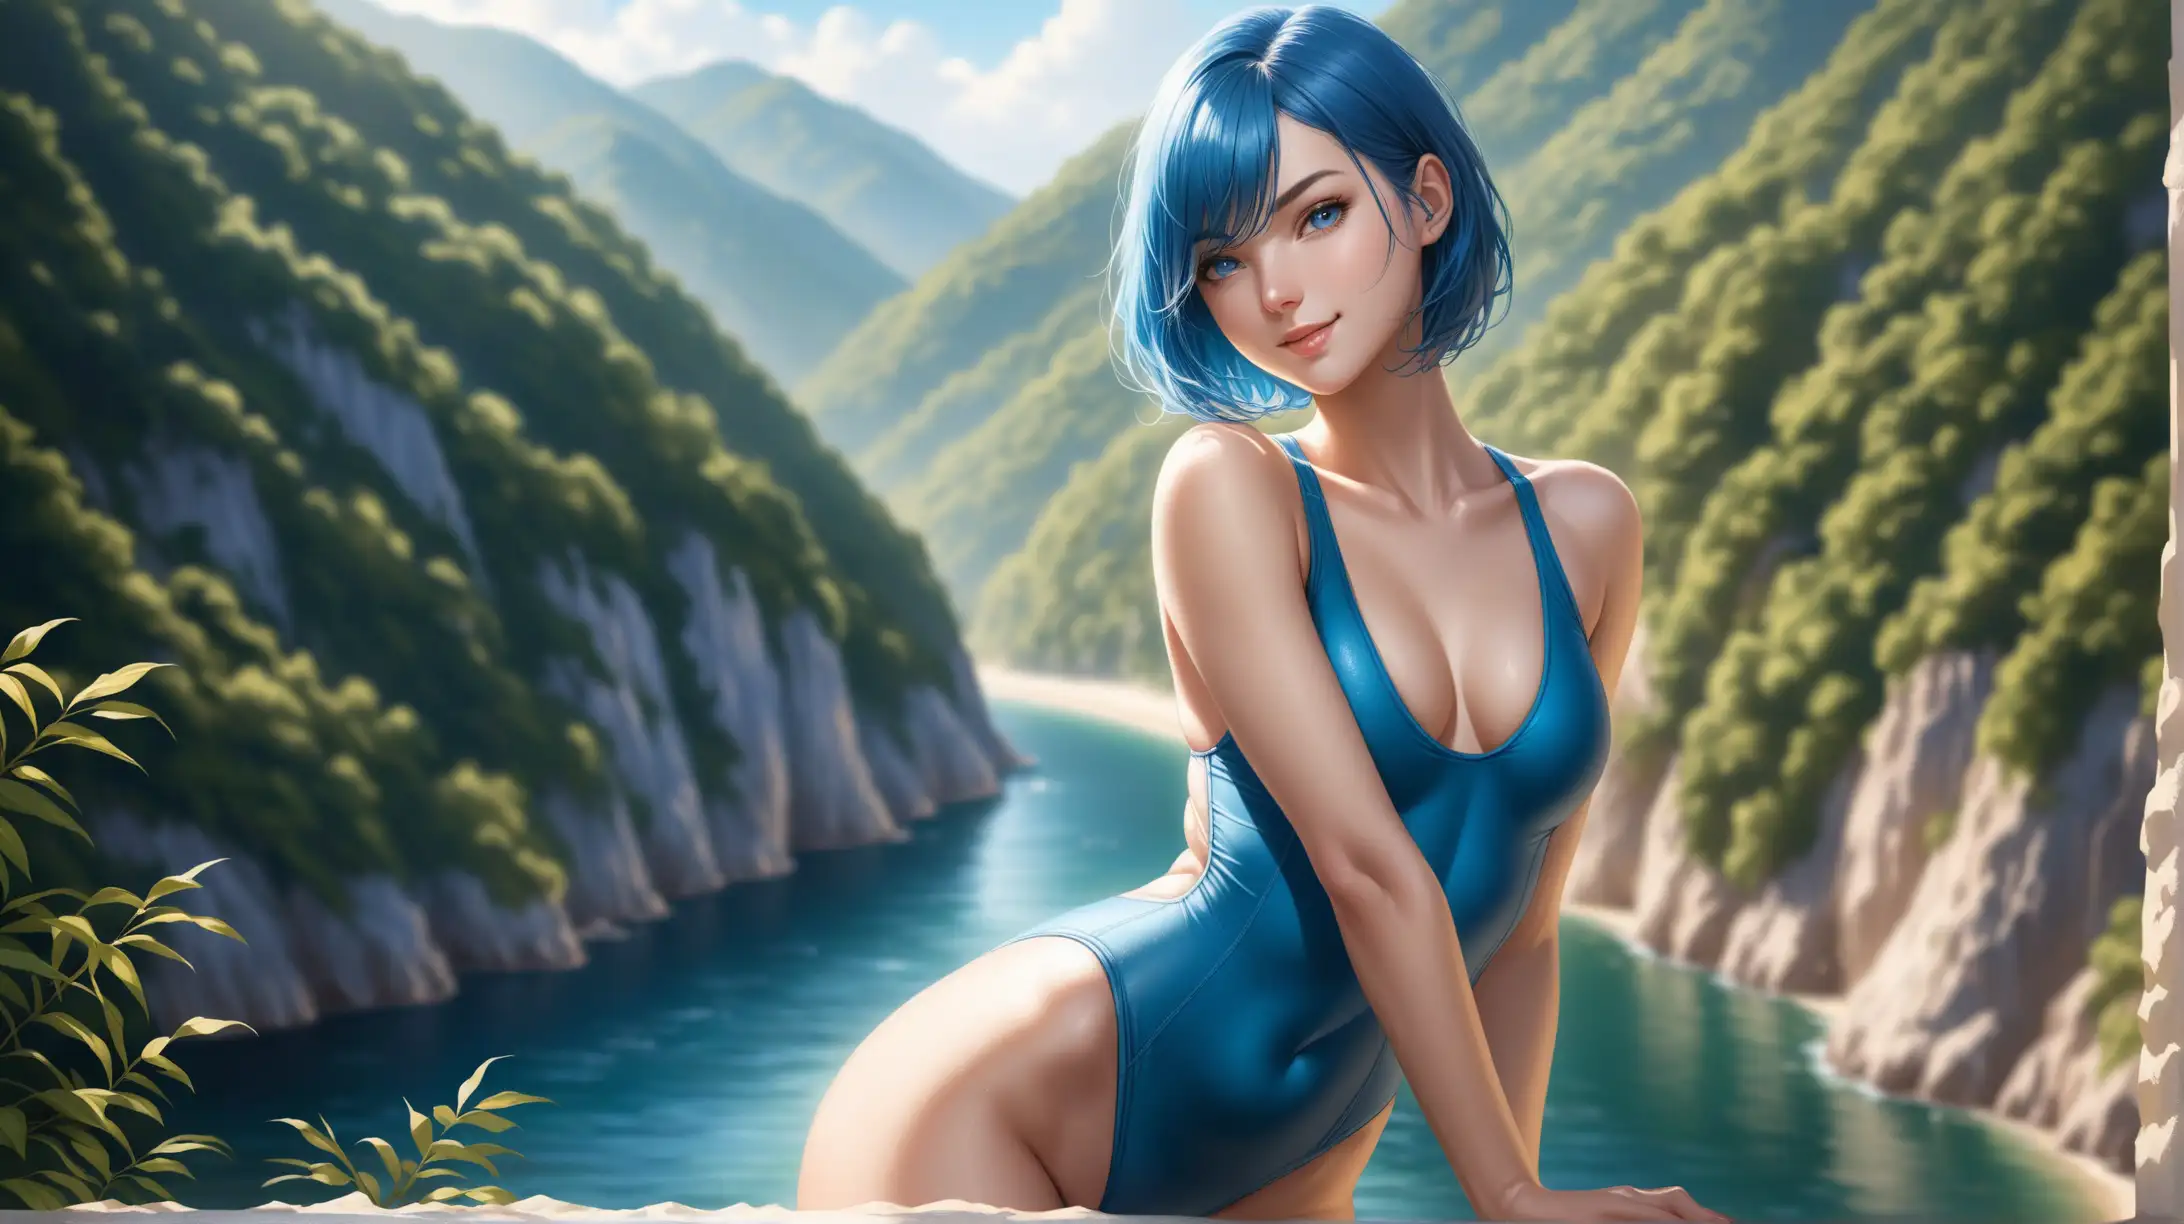 Draw a woman, short blue hair covering one eye, blue eyes, slender figure, high quality, realistic, accurate, detailed, long shot, natural lighting, outdoors, one-piece swimsuit, seductive pose, smiling at the viewer